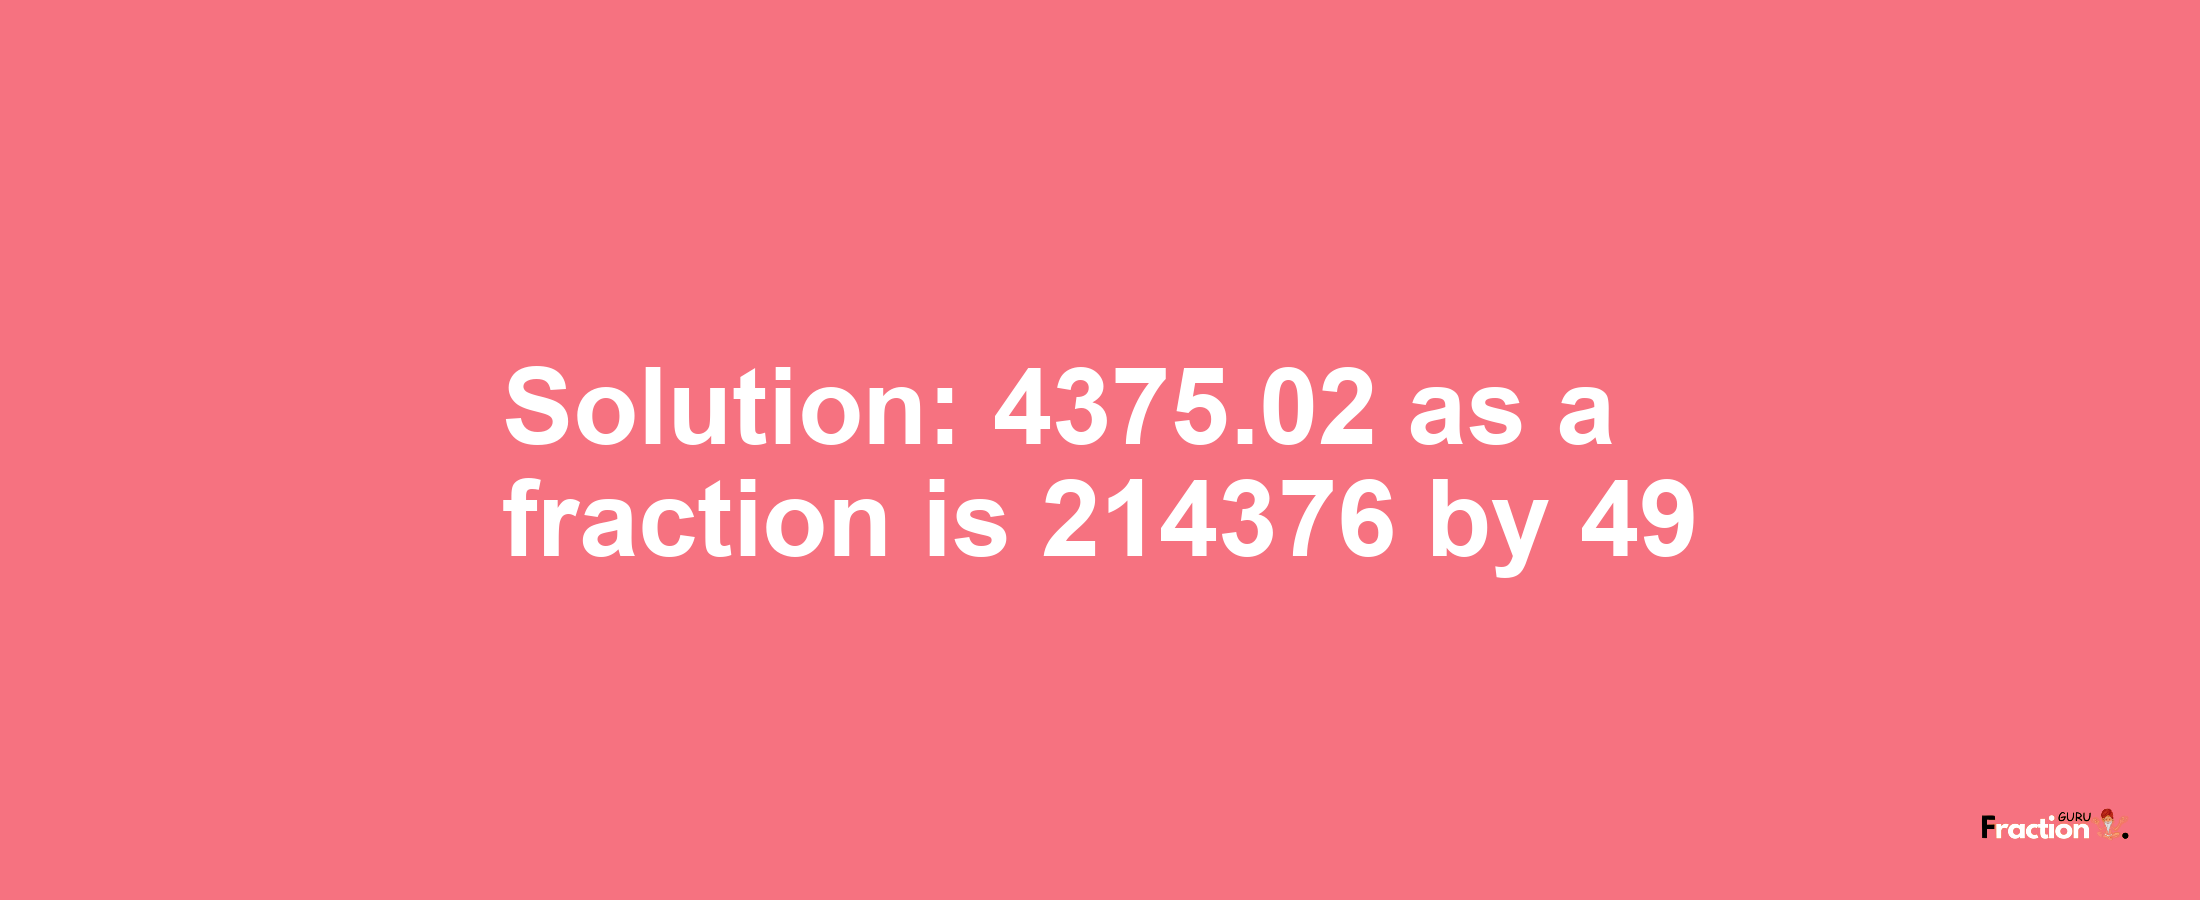 Solution:4375.02 as a fraction is 214376/49